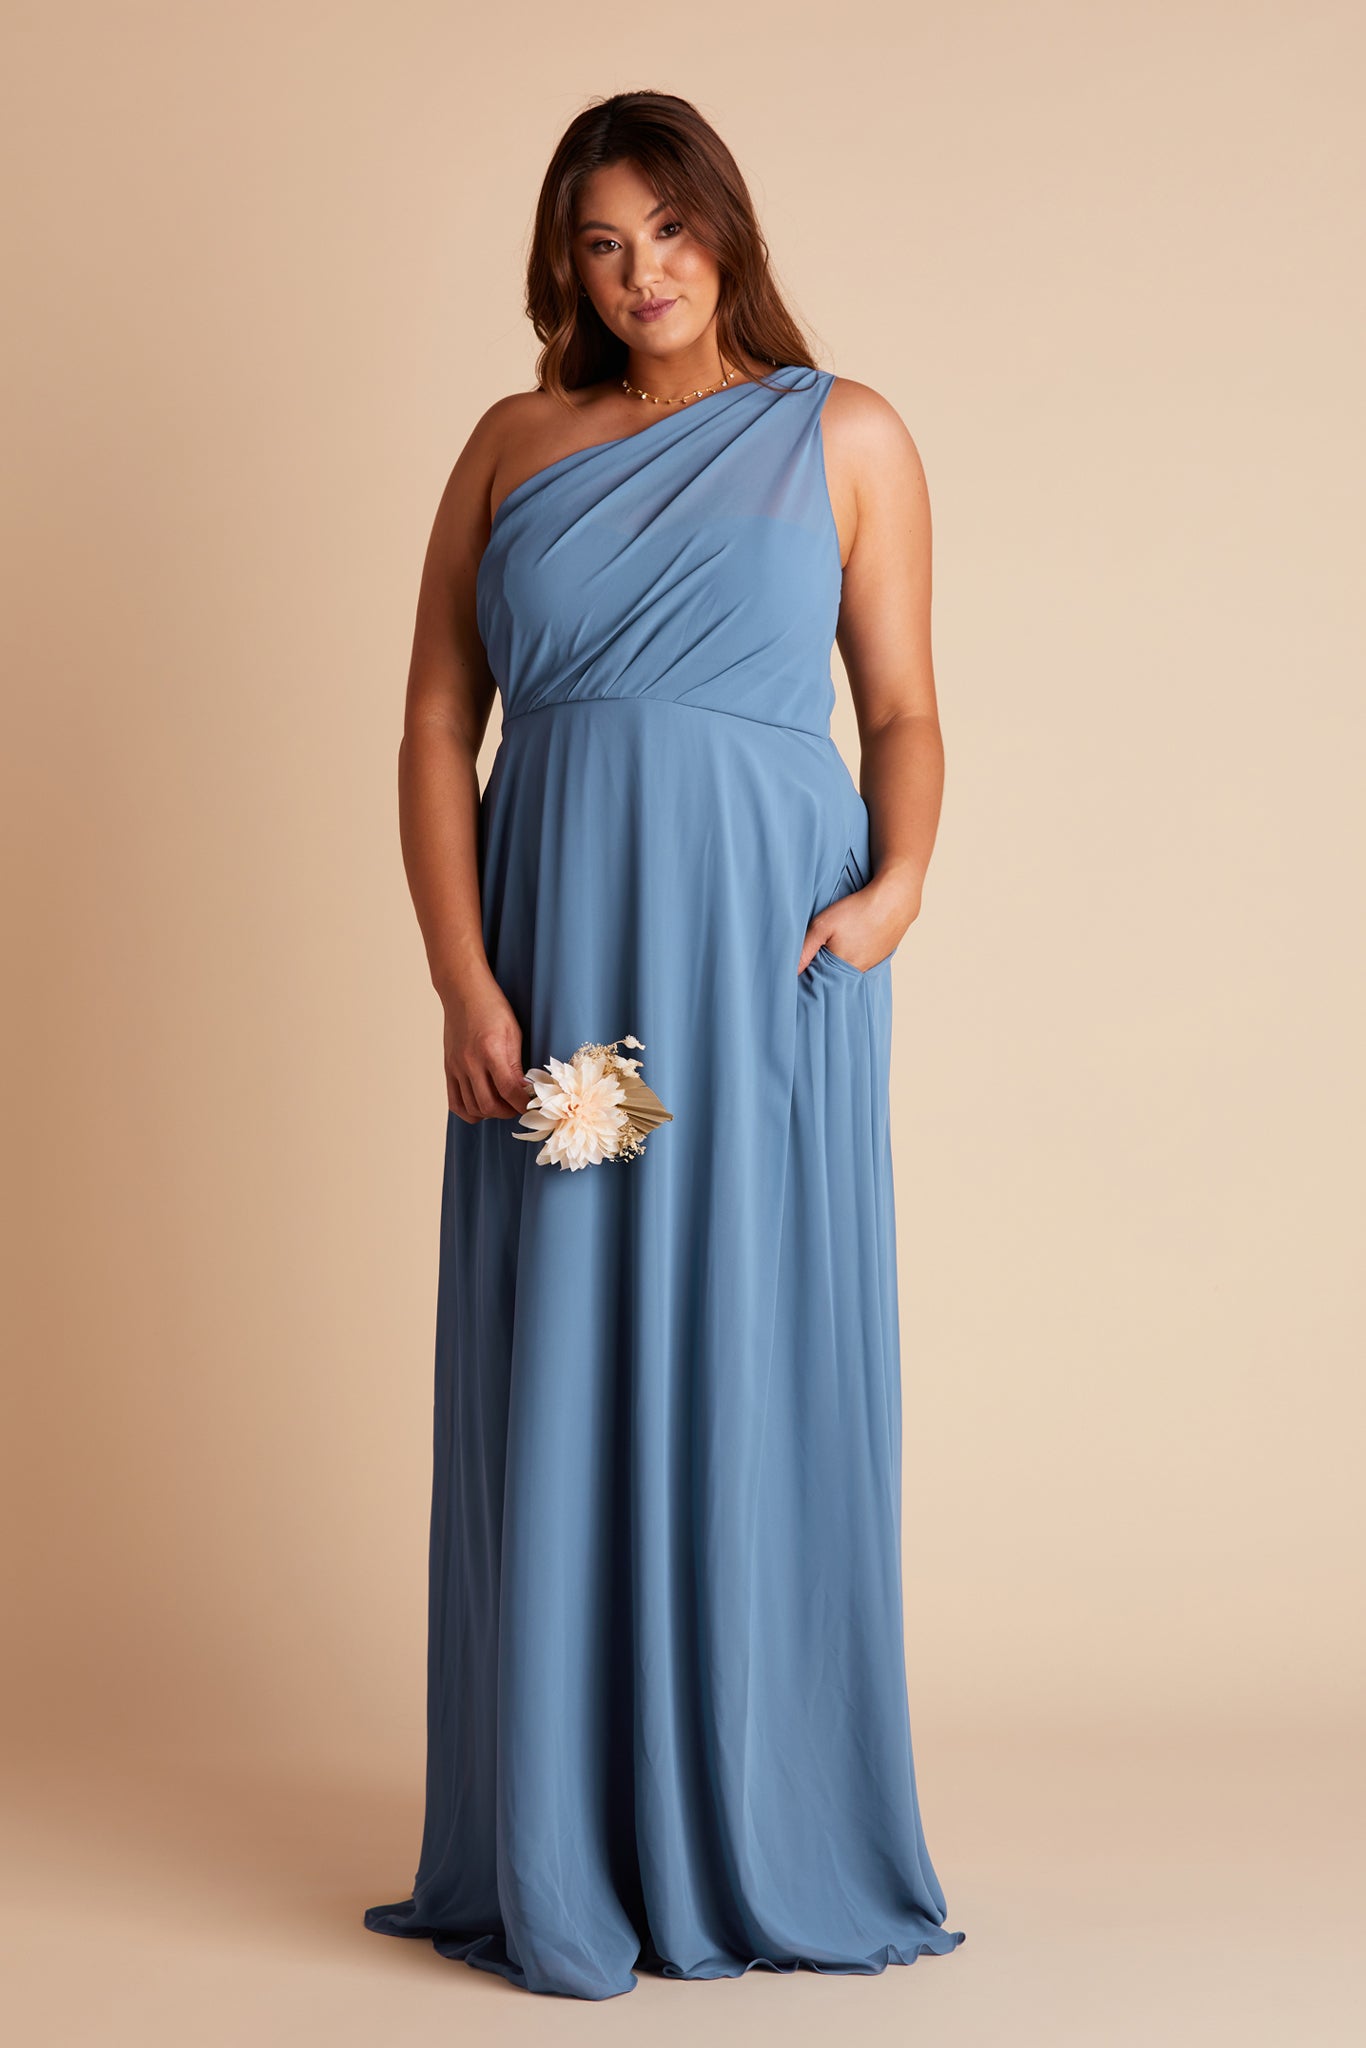 Kira plus size bridesmaids dress in twilight blue chiffon by Birdy Grey, front view with hand in pocket